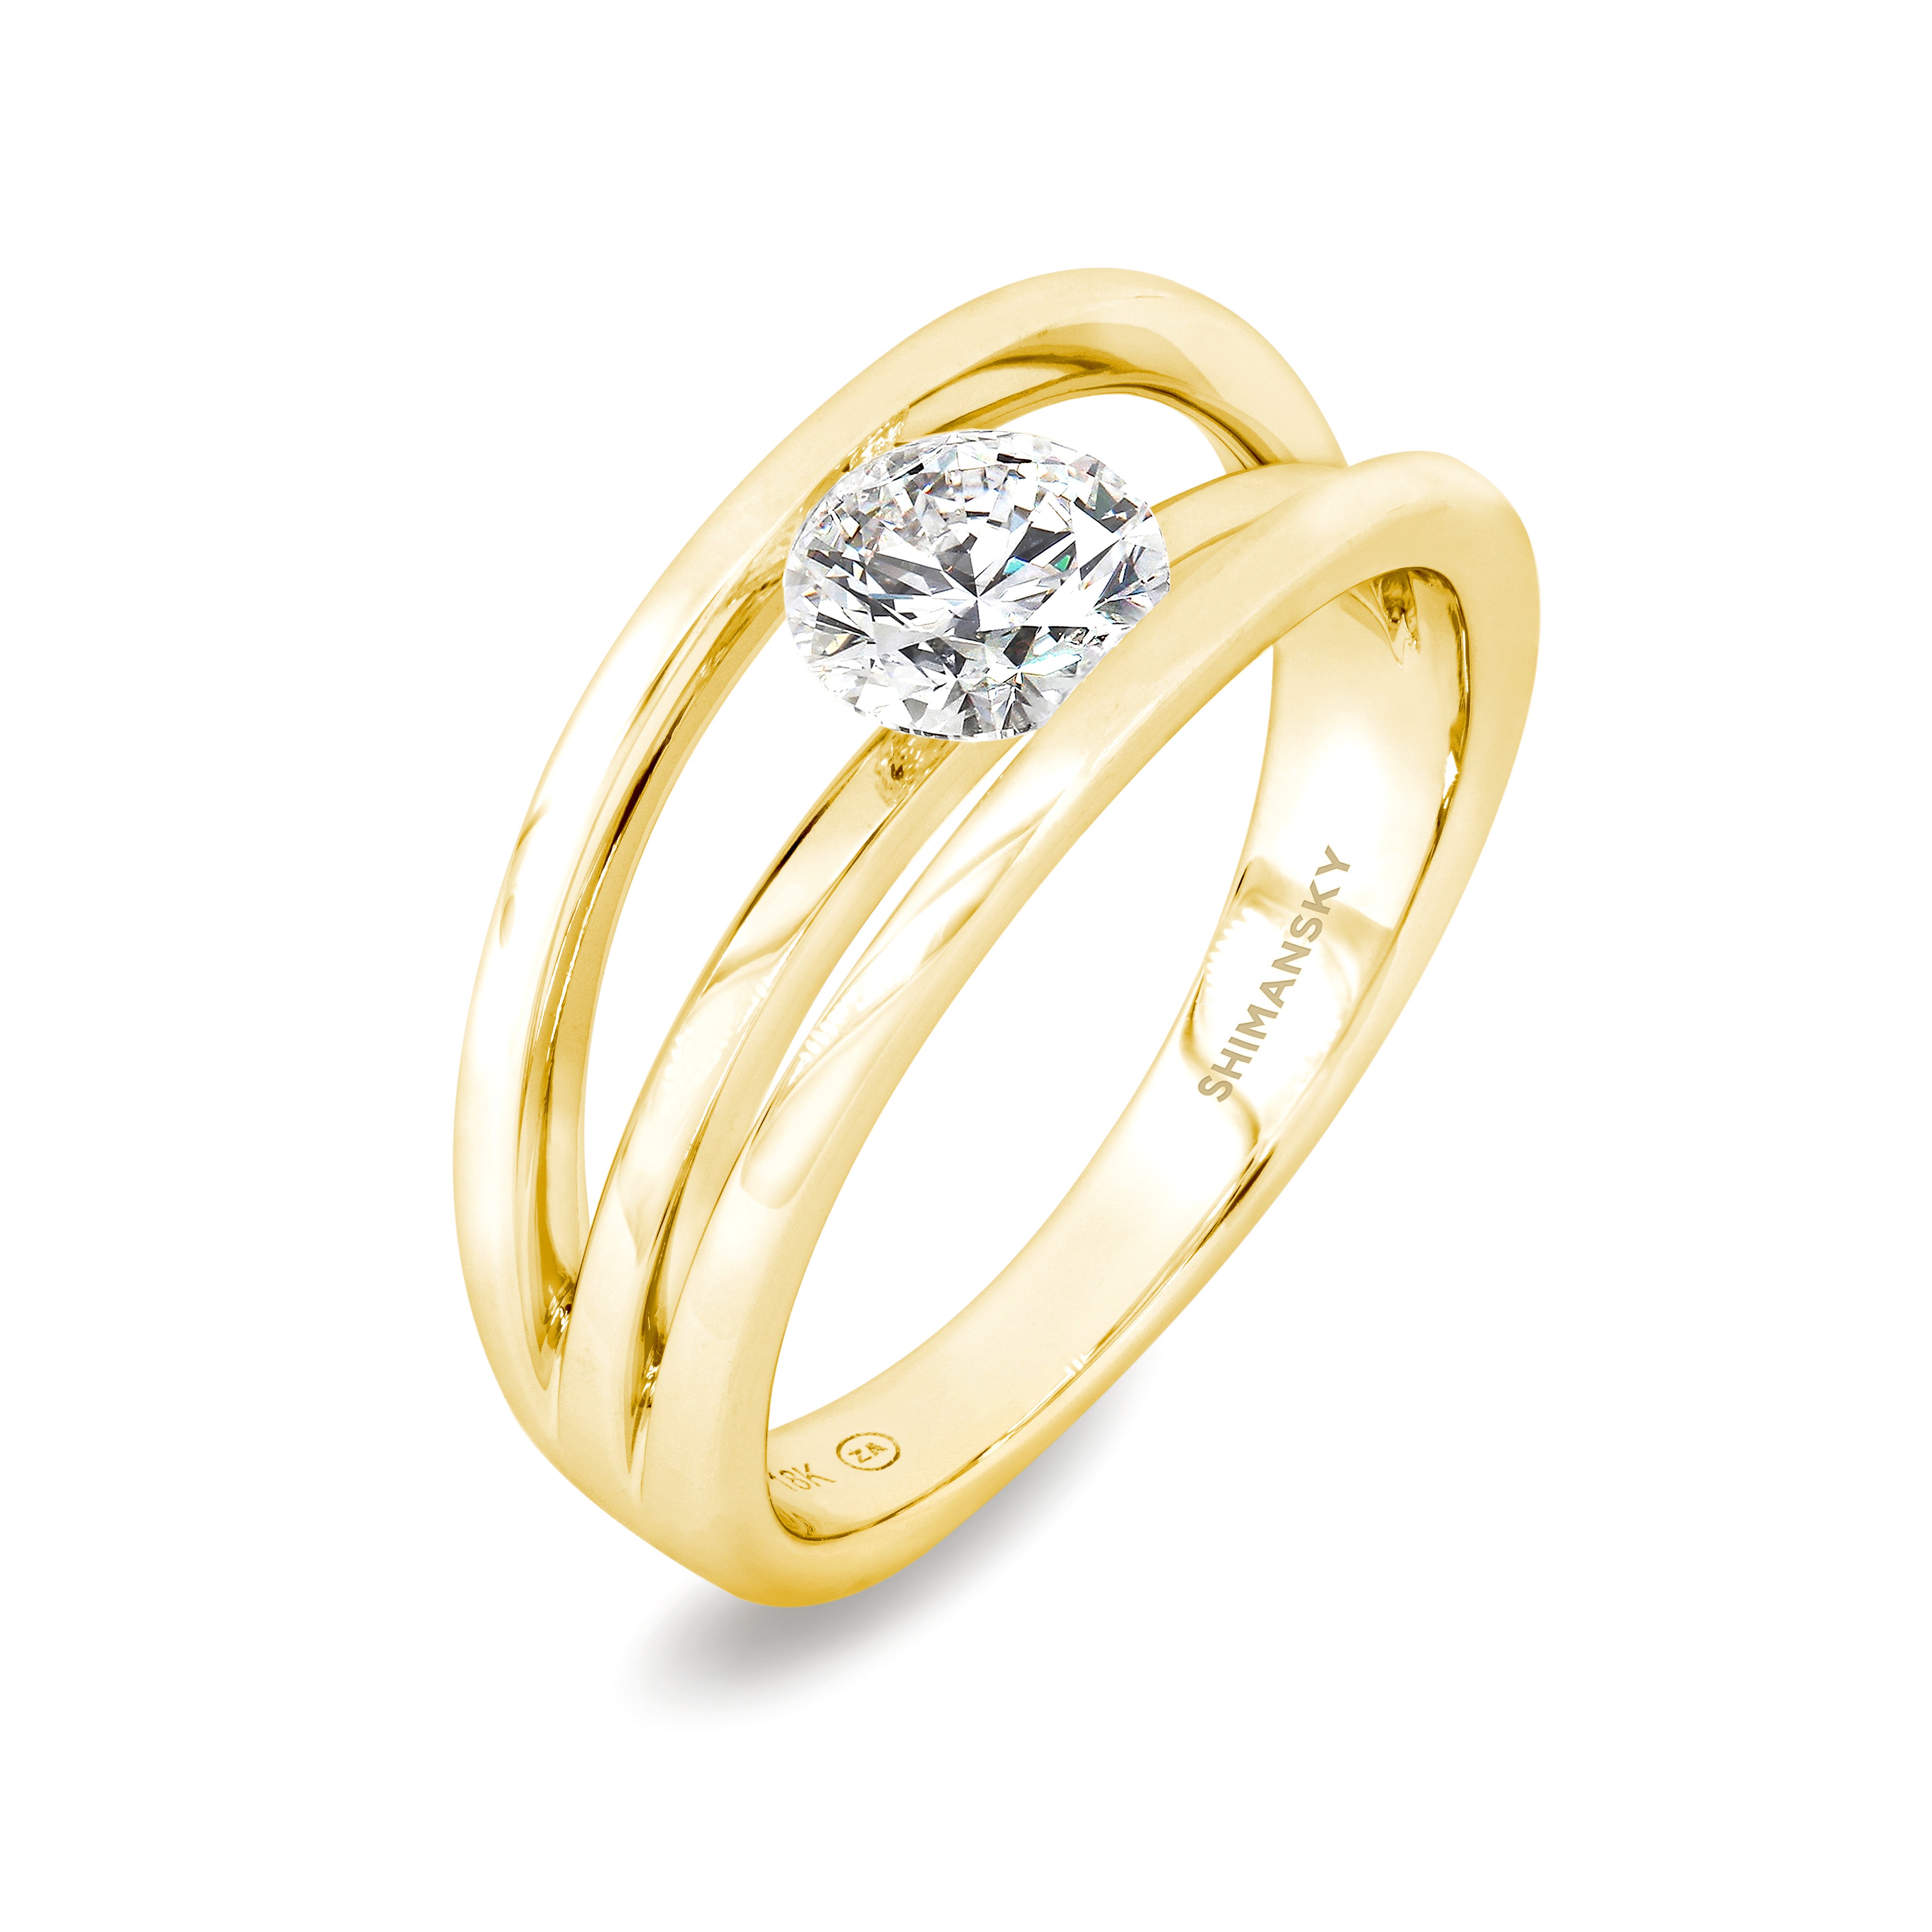 Evolym Diamond Engagement Ring 0.70 Carat in 18K Yellow Gold 3D View